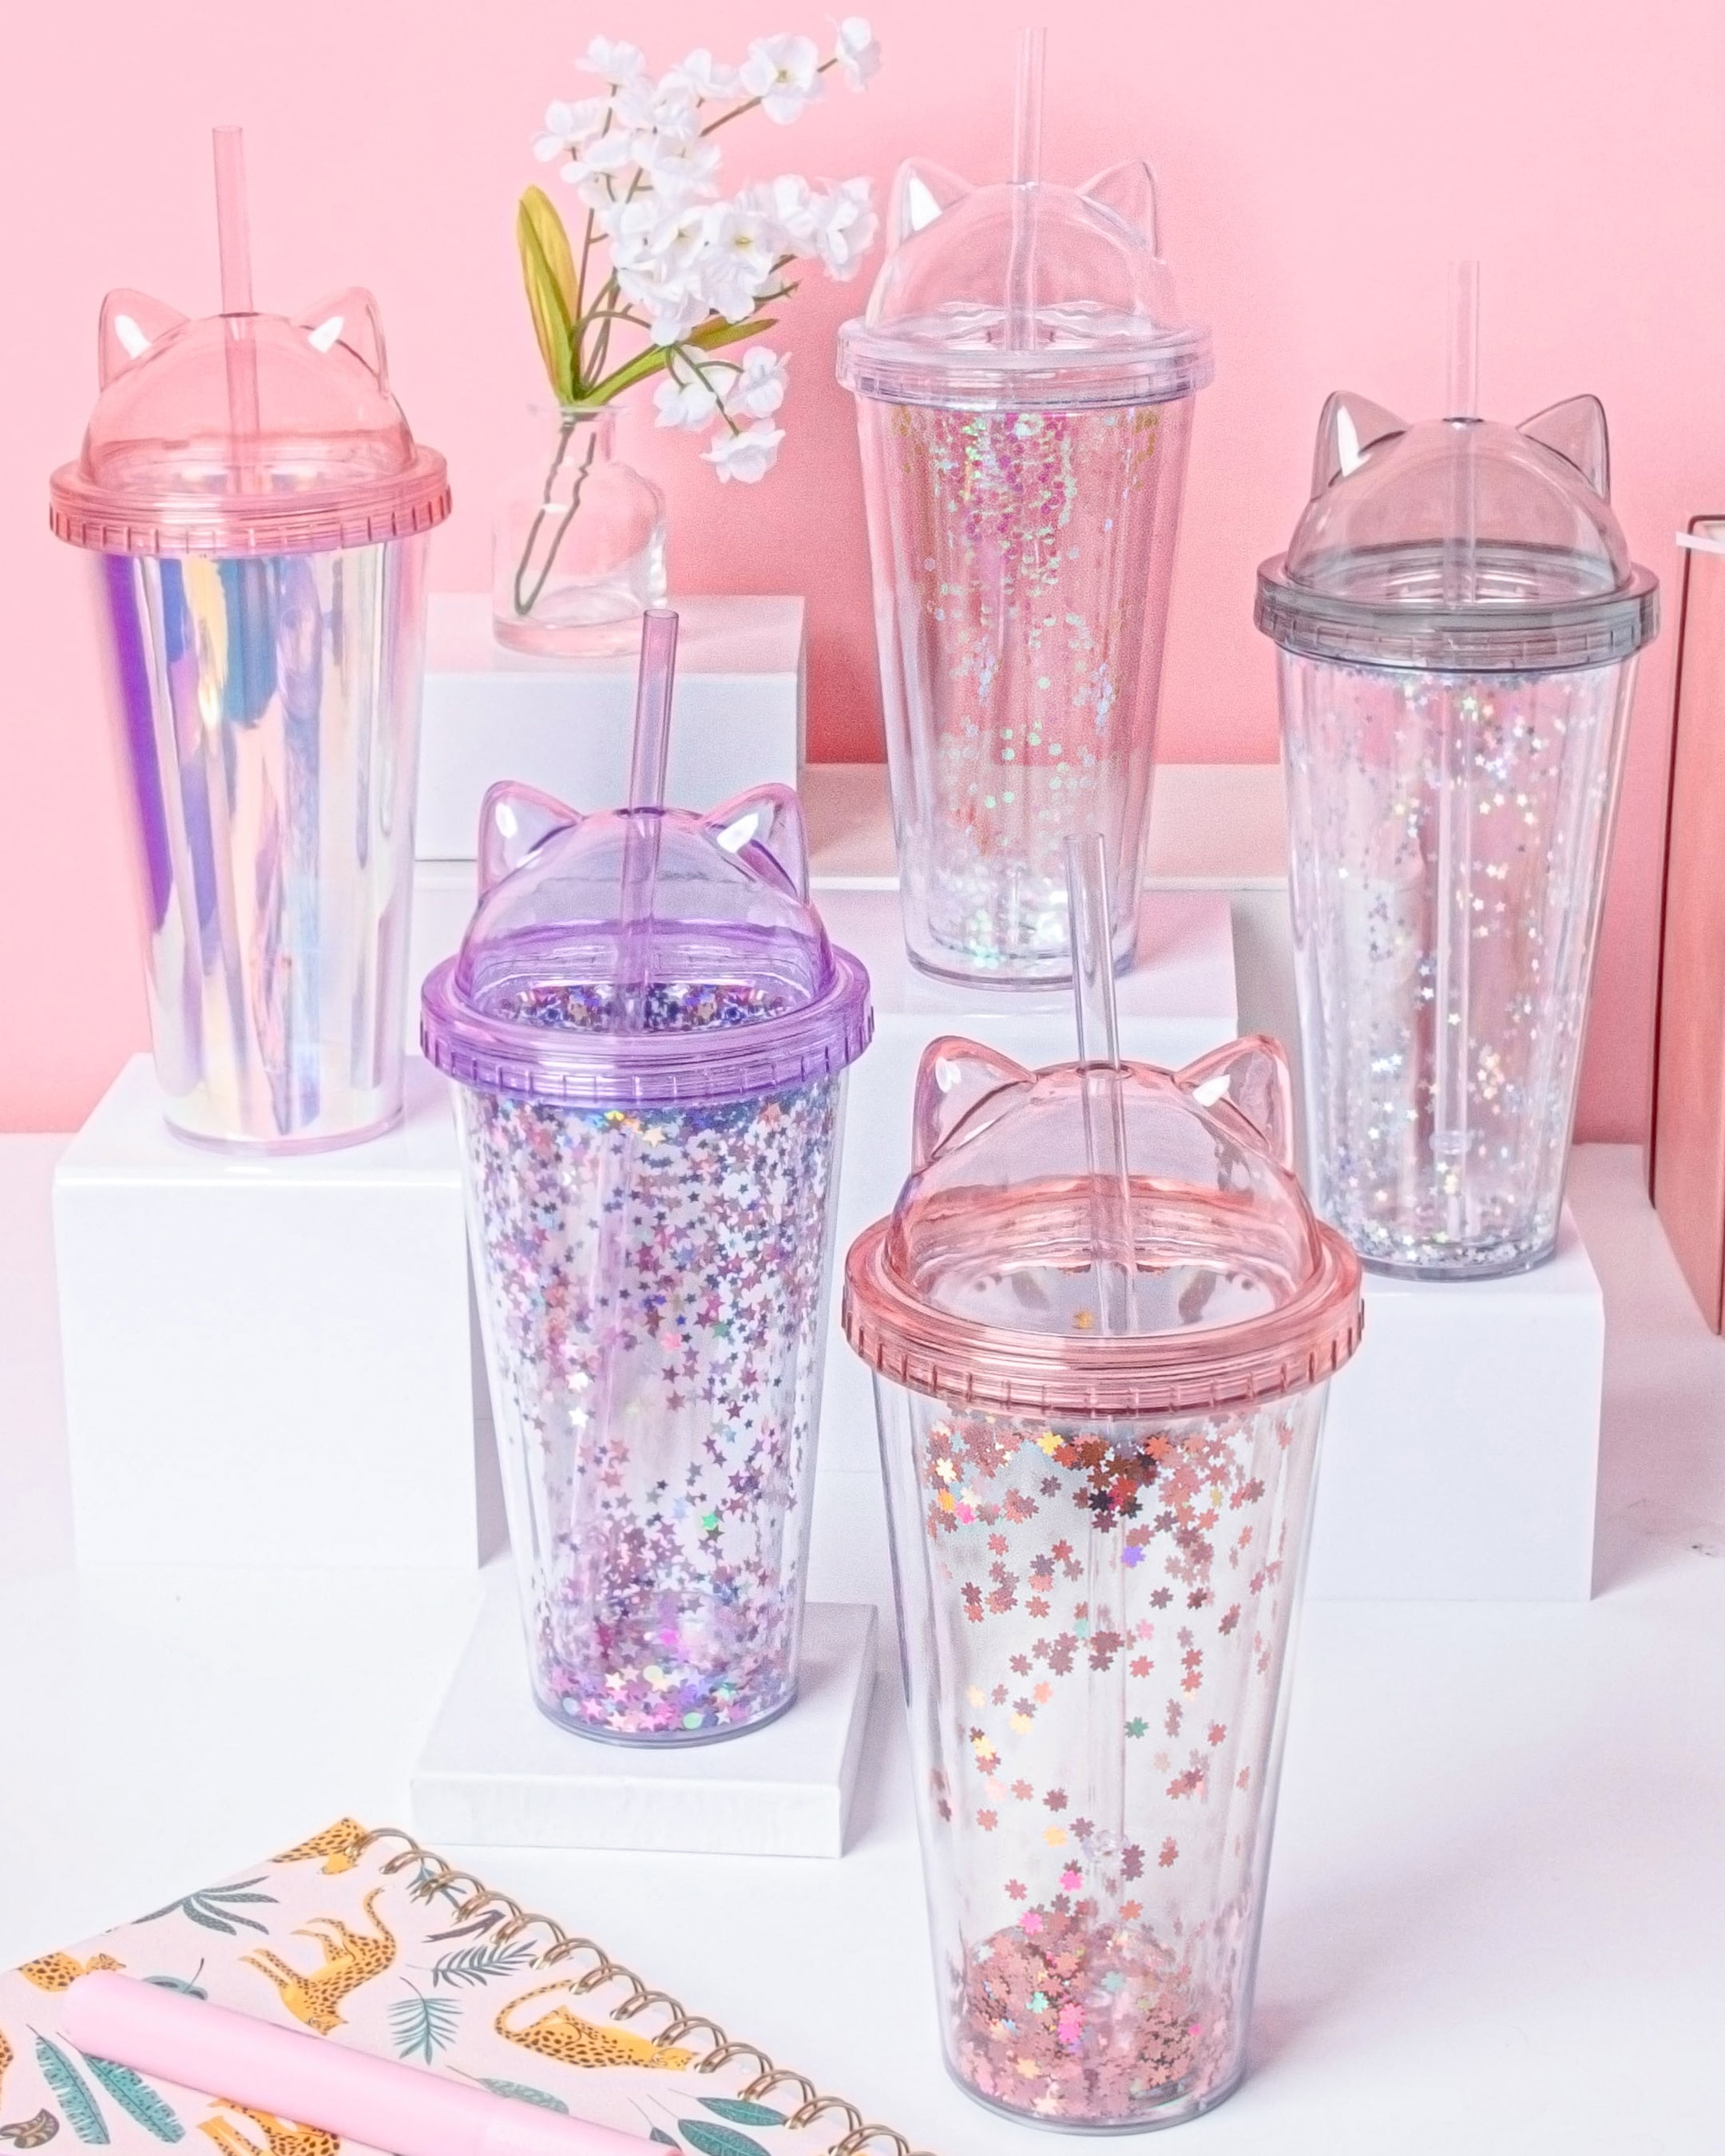 Glitter Cat Water Bottle - 5 Colors - Freefalling Design - Reuseable  Plastic Cup w/ Dome Lid and Straw - 300ml Size - Order Includes 1 Bottle - Glitter  Water Bottle Collection {Pink-Iridescent) 